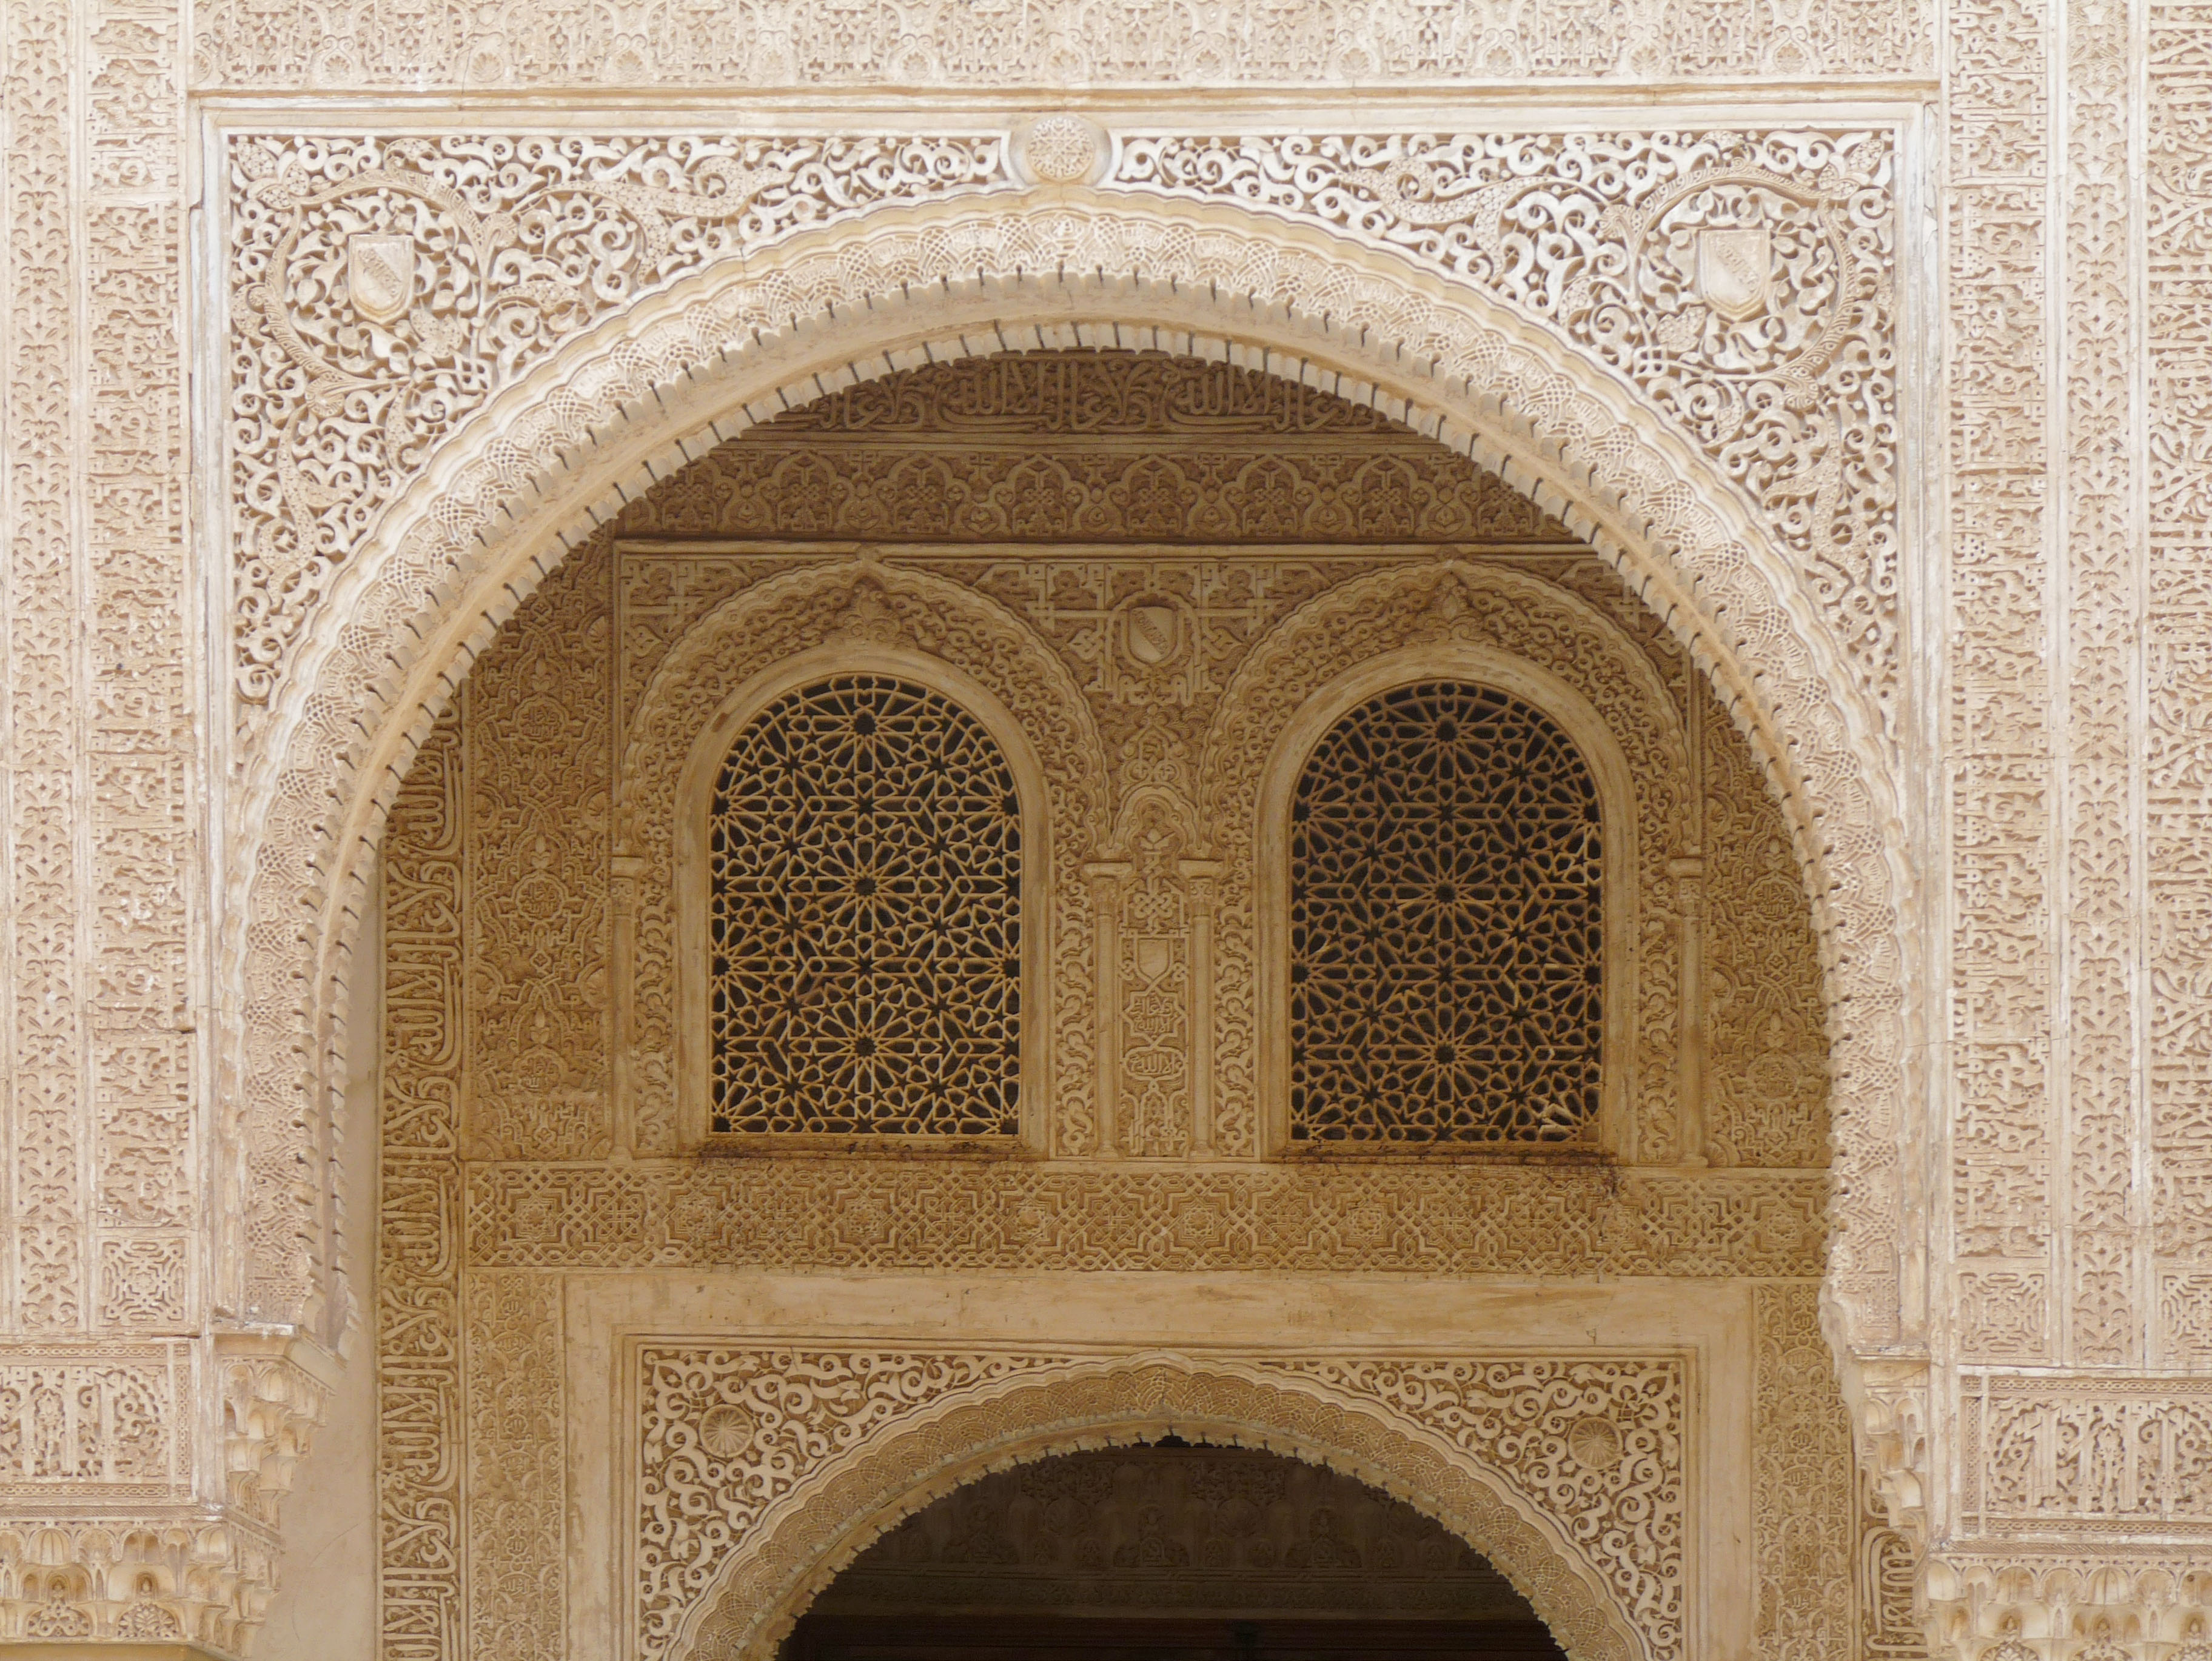 guided visit to the Alhambra and the Generalife